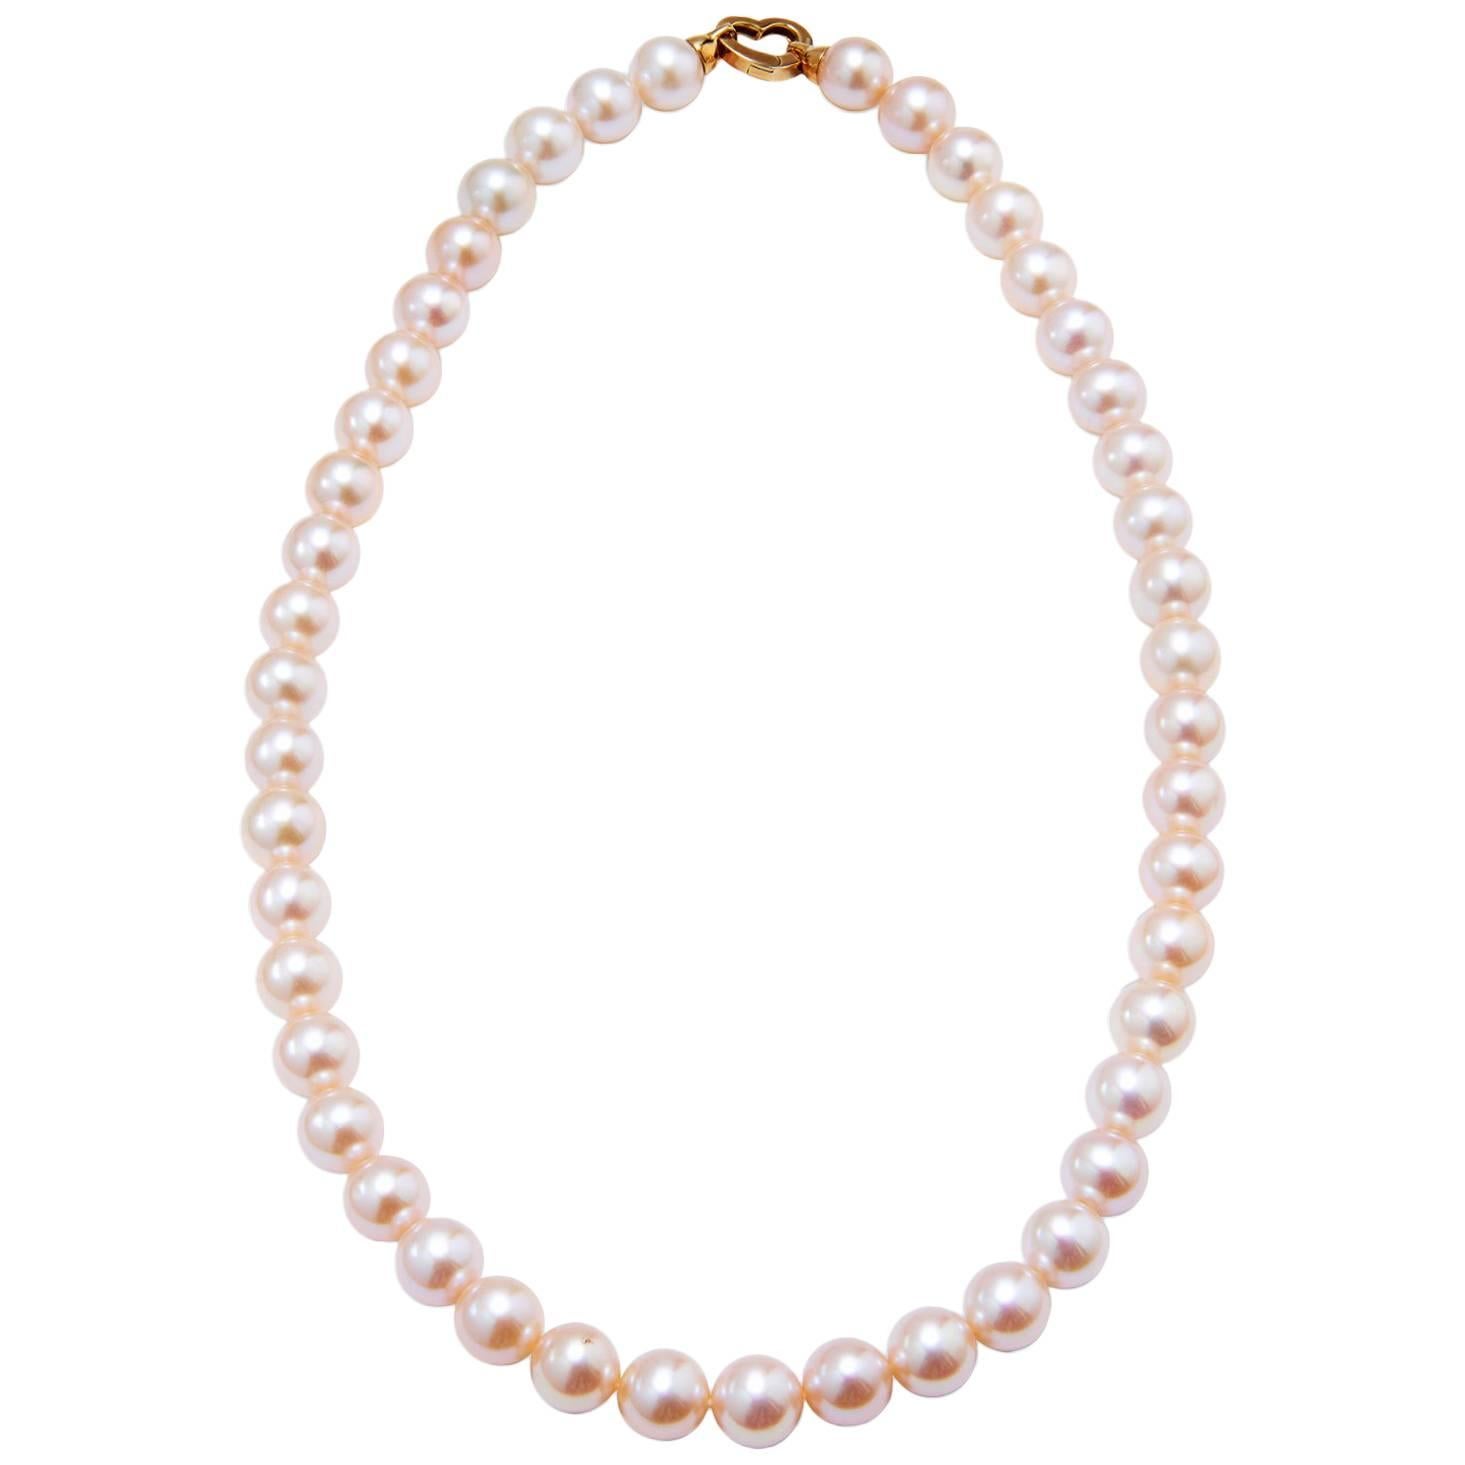 H&H Handmade Fresh Water Pearl Necklace